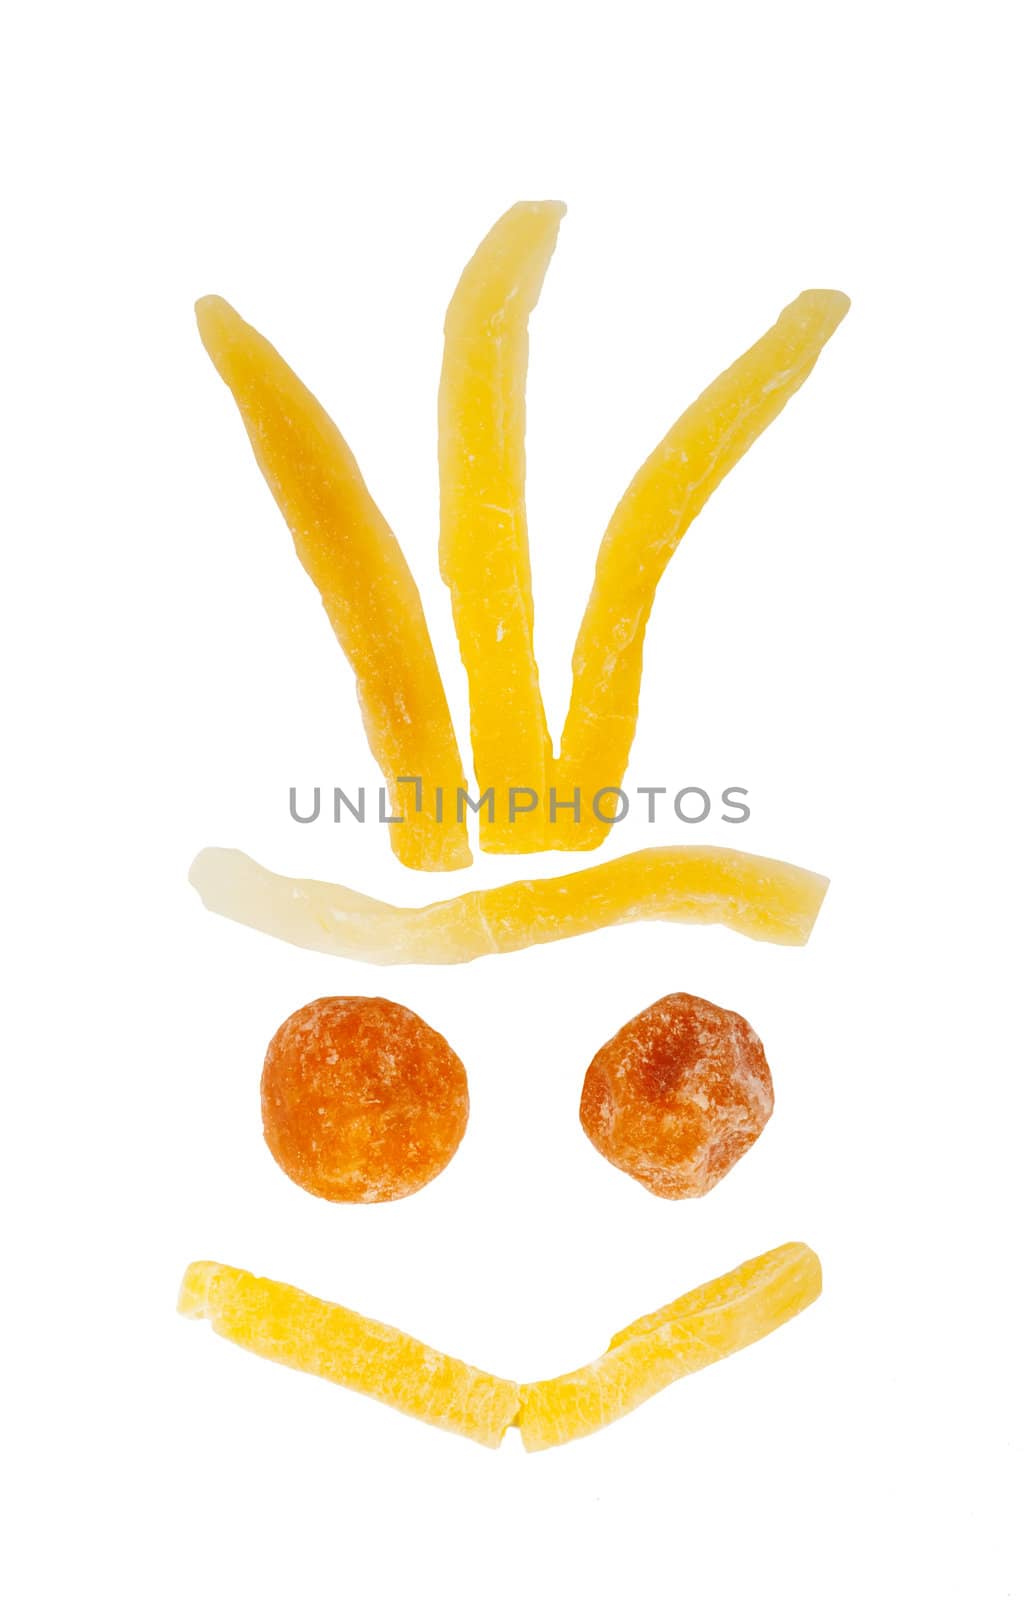 Funny shape made with dried sweet fruits by RawGroup